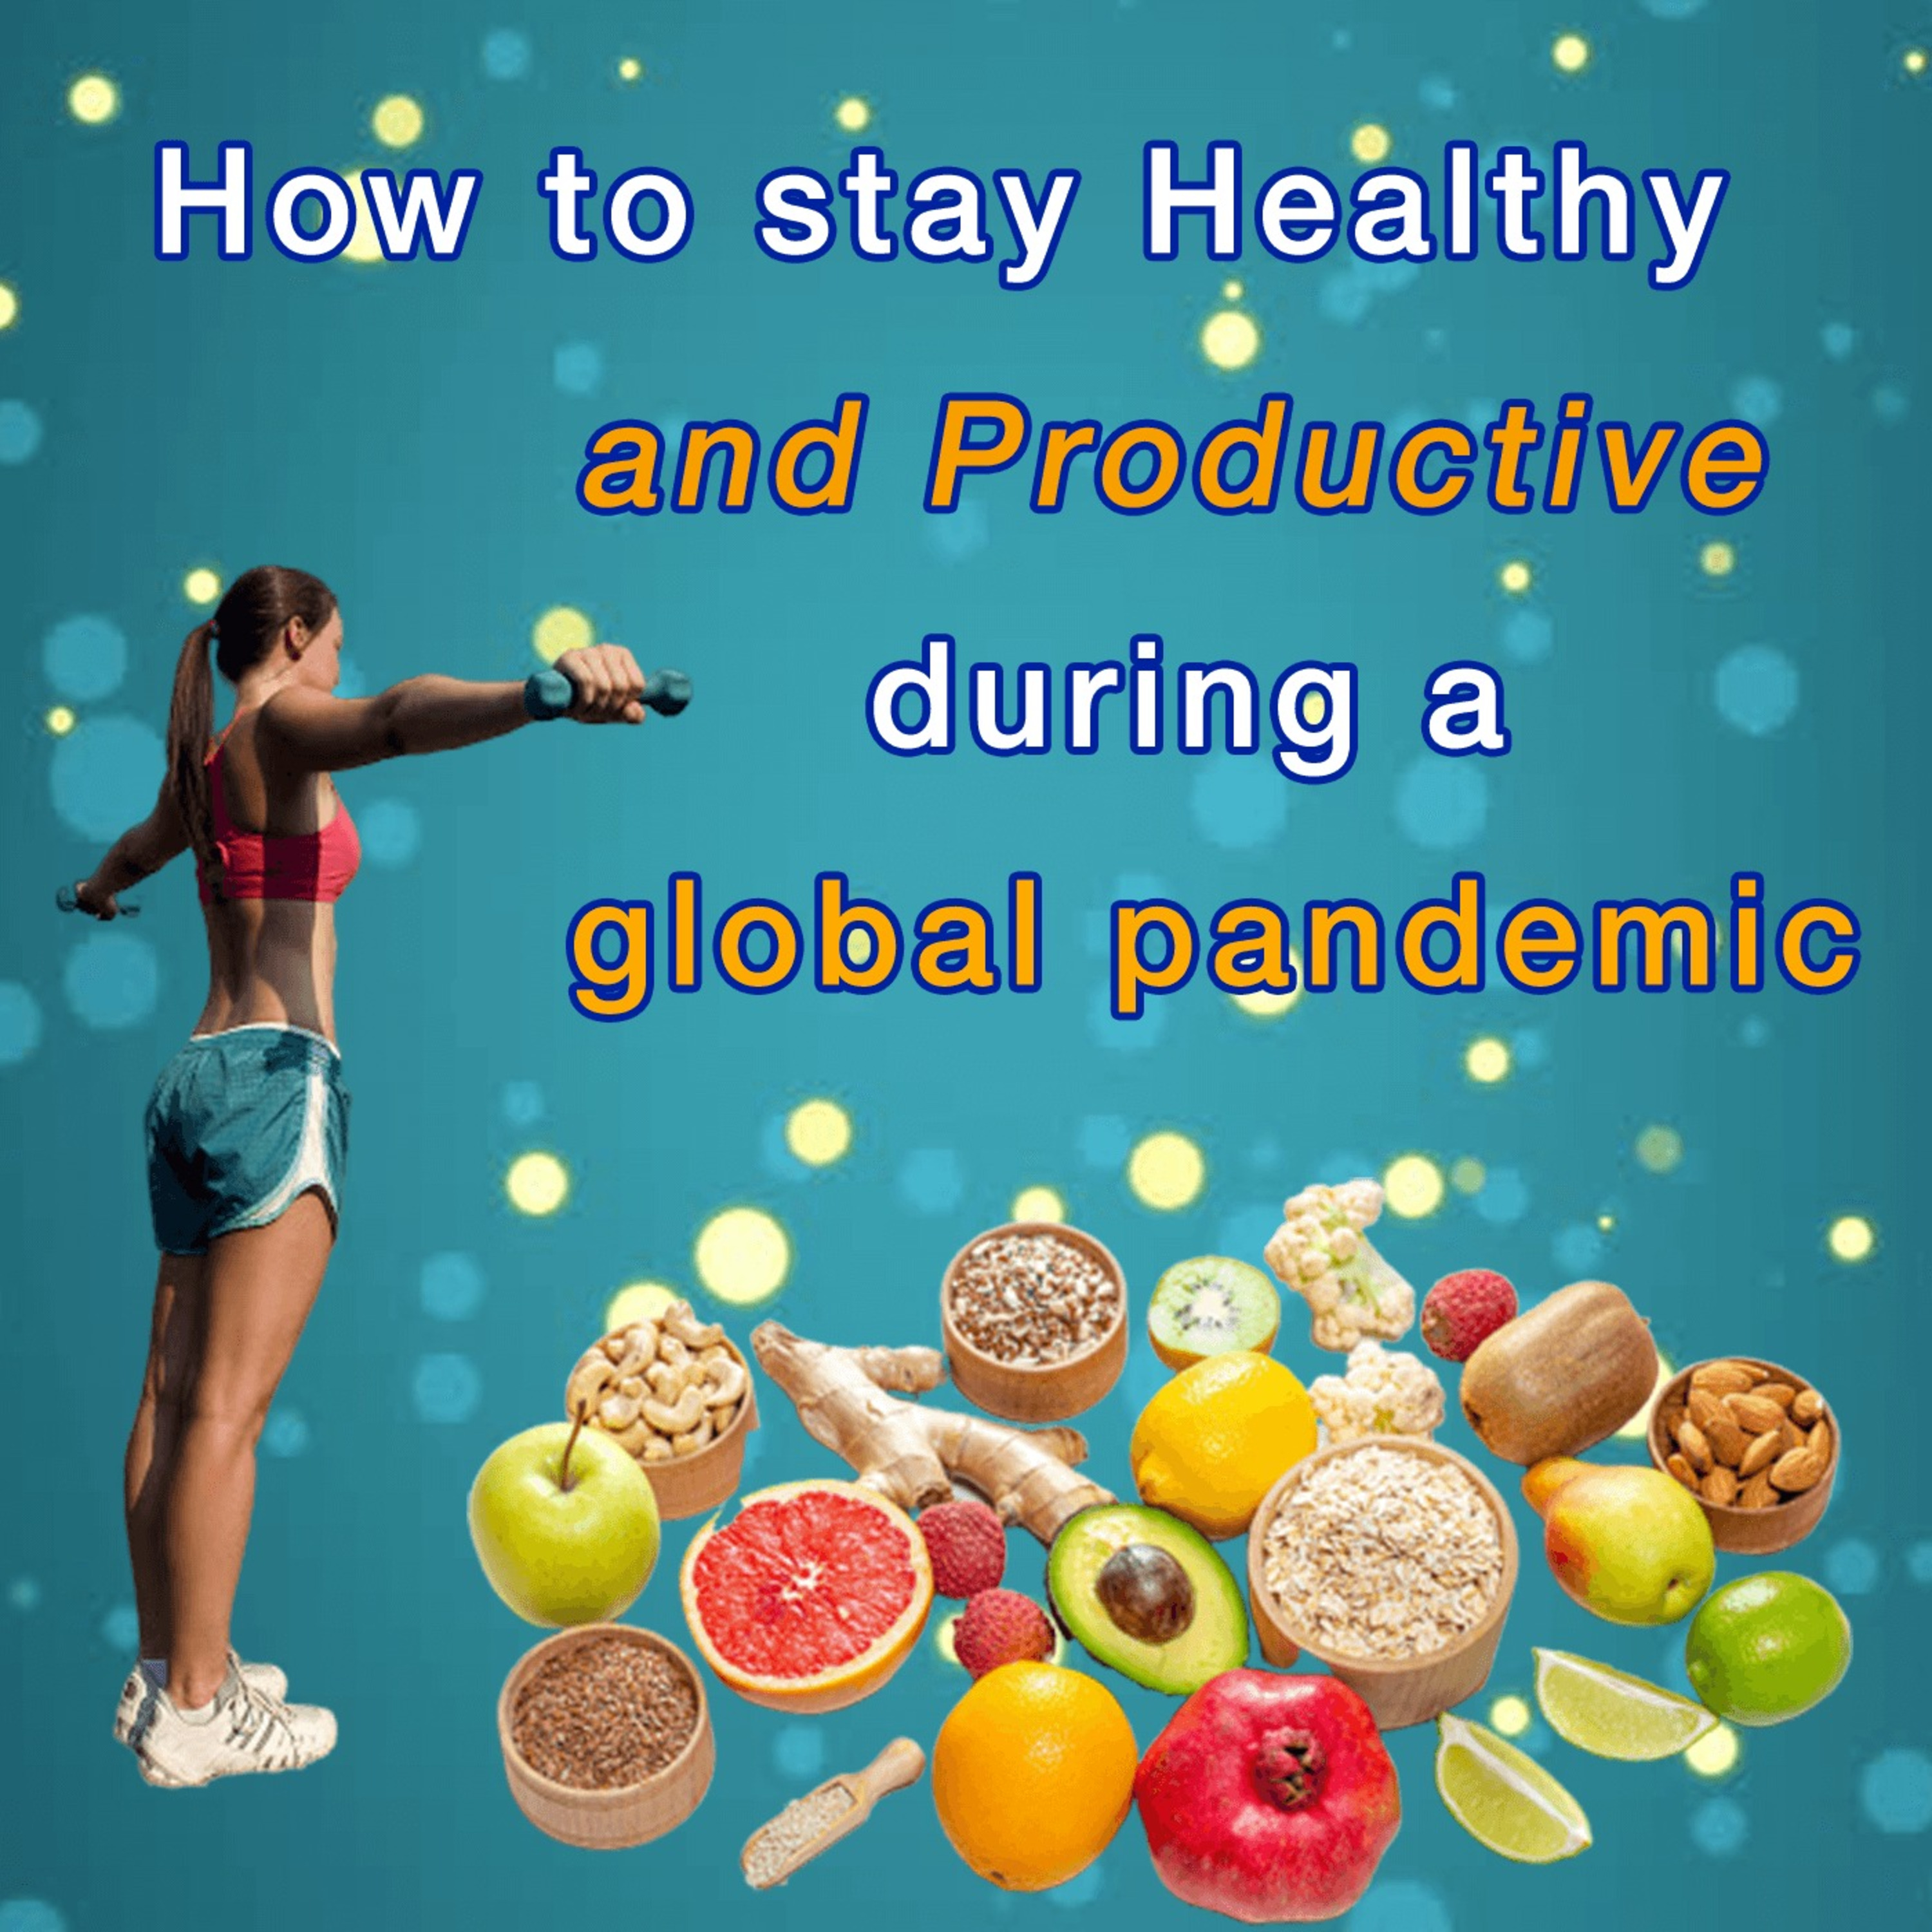 How to stay healthy and productive during the coronavirus pandemic